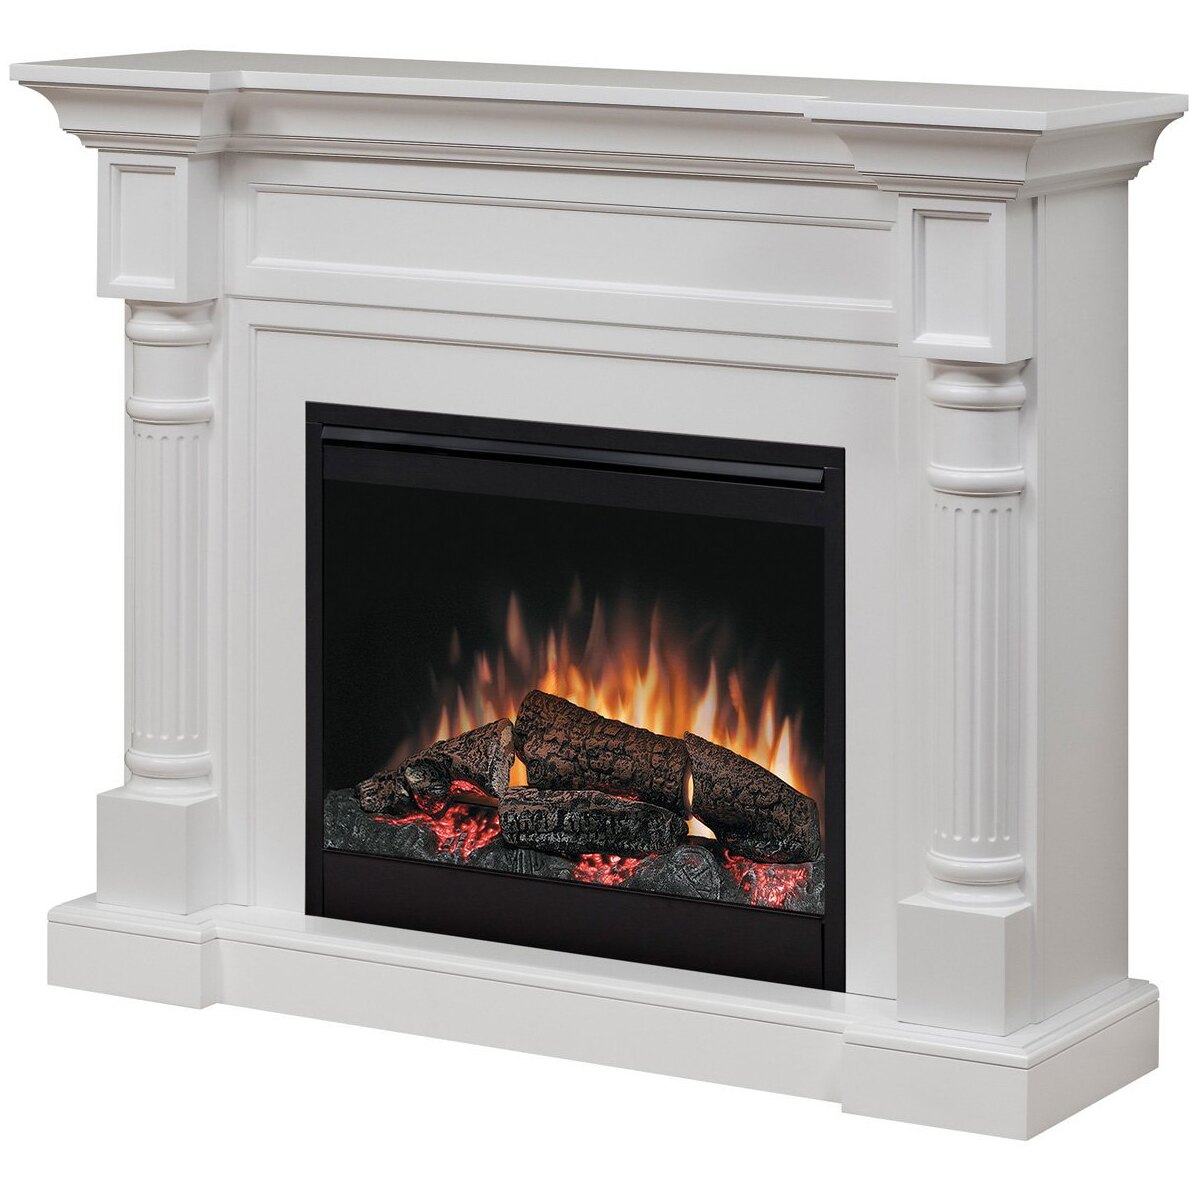 Corner Electric Fireplace with Mantel Beautiful Dimplex Winston Electric Fireplace Mantel White